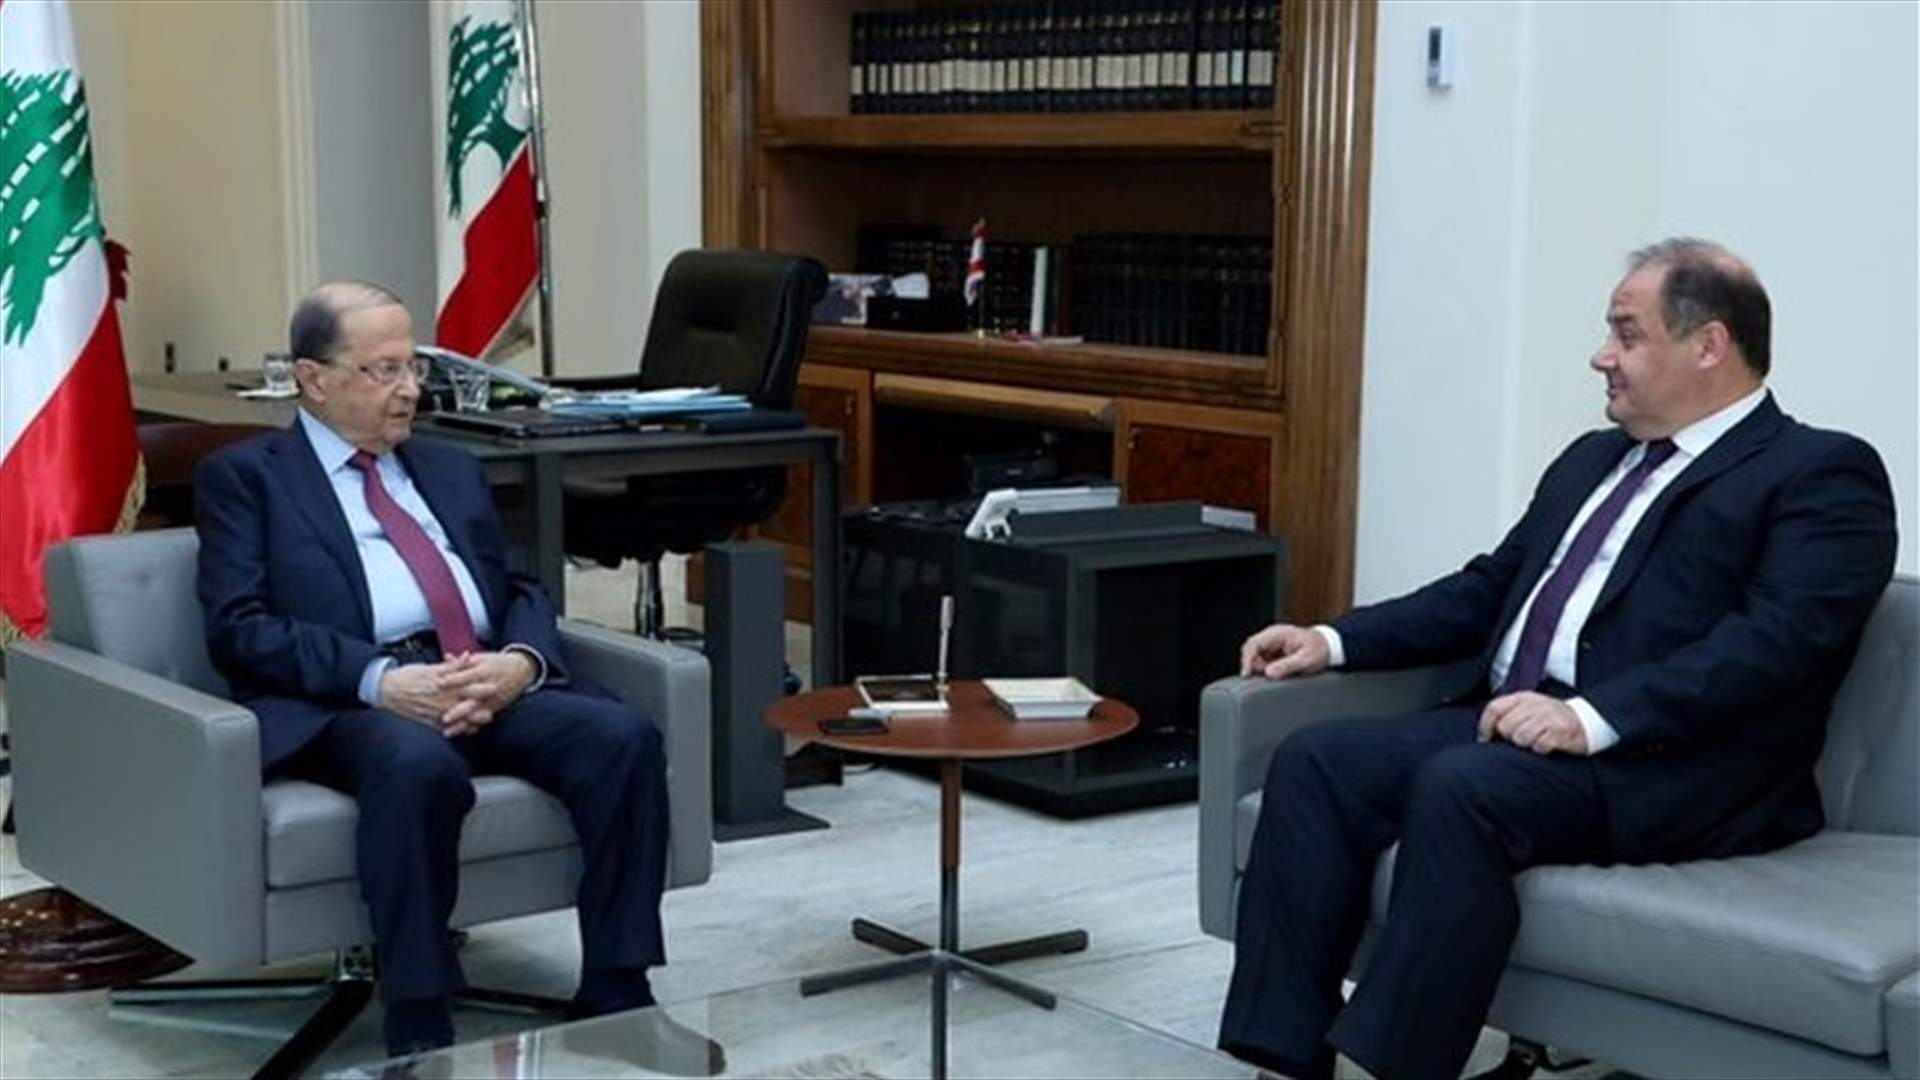 President Aoun meets with Arbid and delegation from the Court of Audit